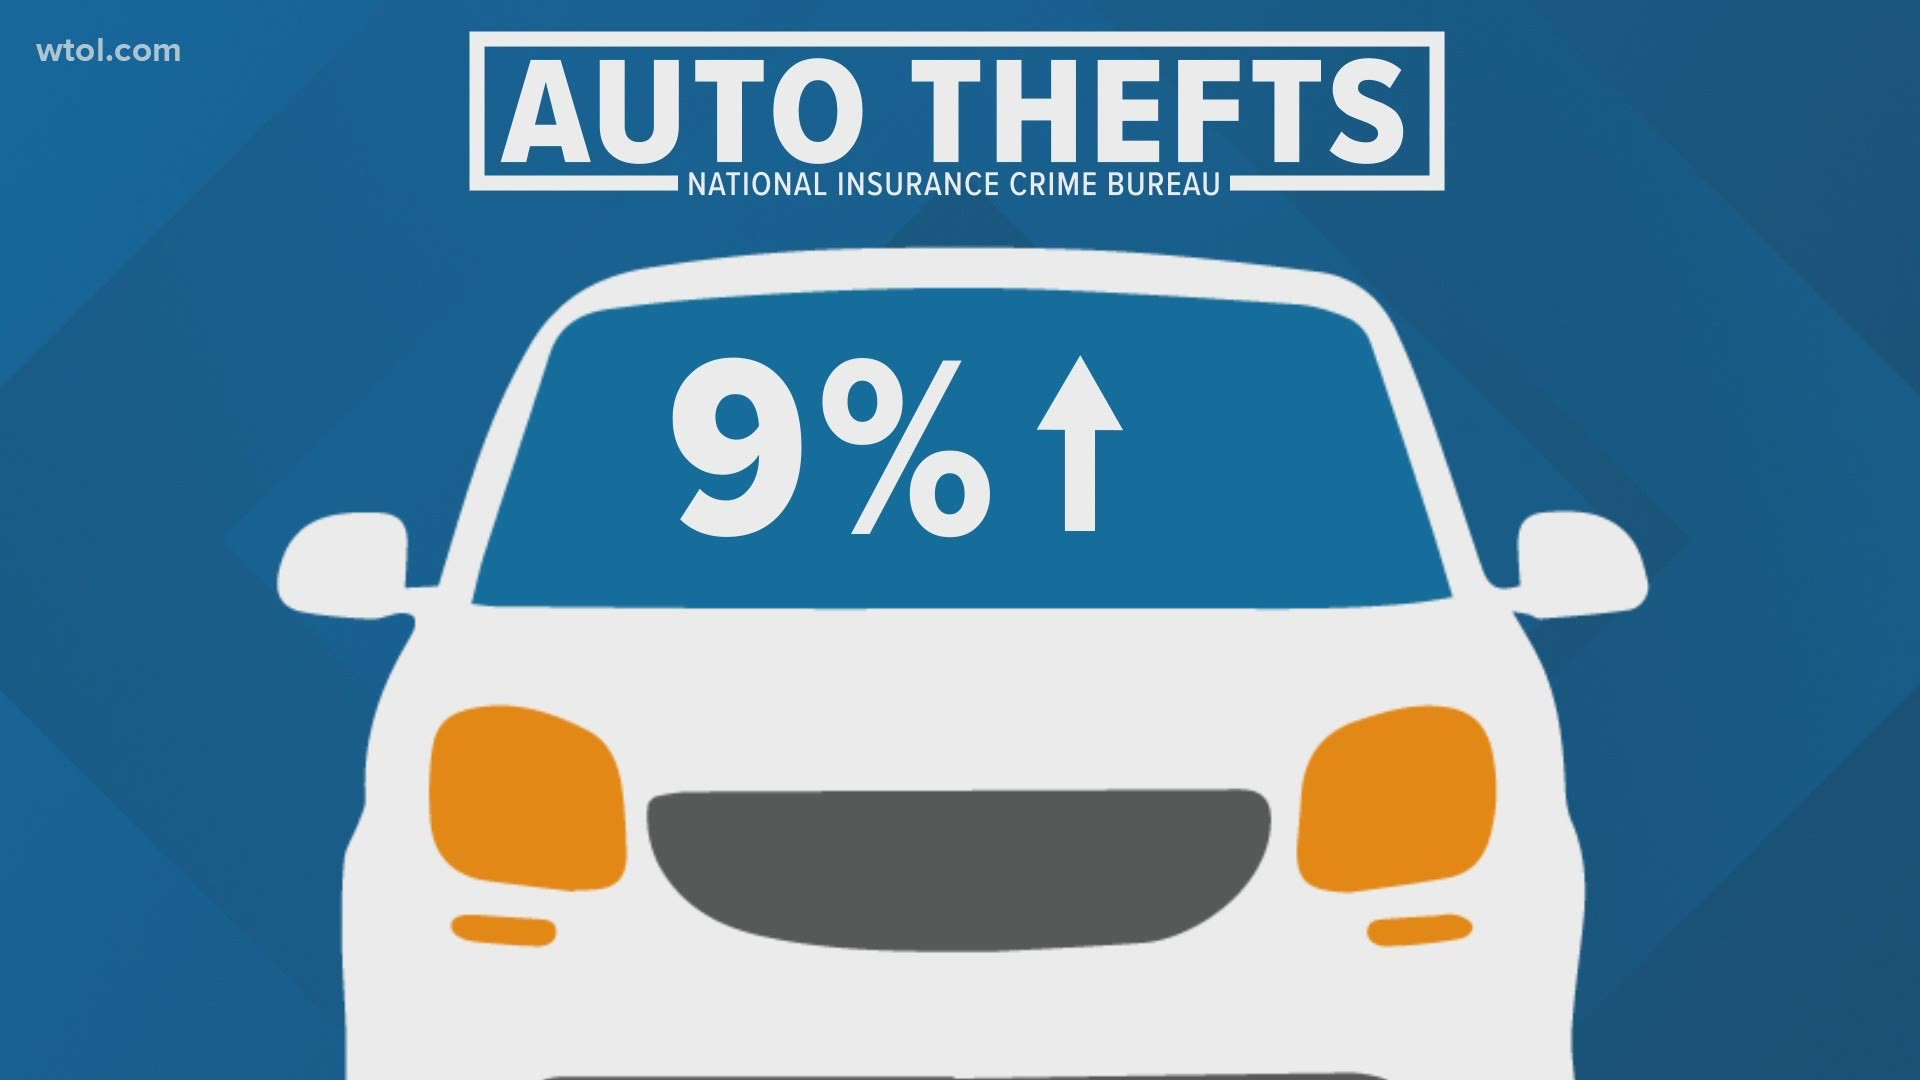 Auto thefts are on the rise across the country, including in Ohio and here in Toledo. They account for over $6 billion in losses each year.